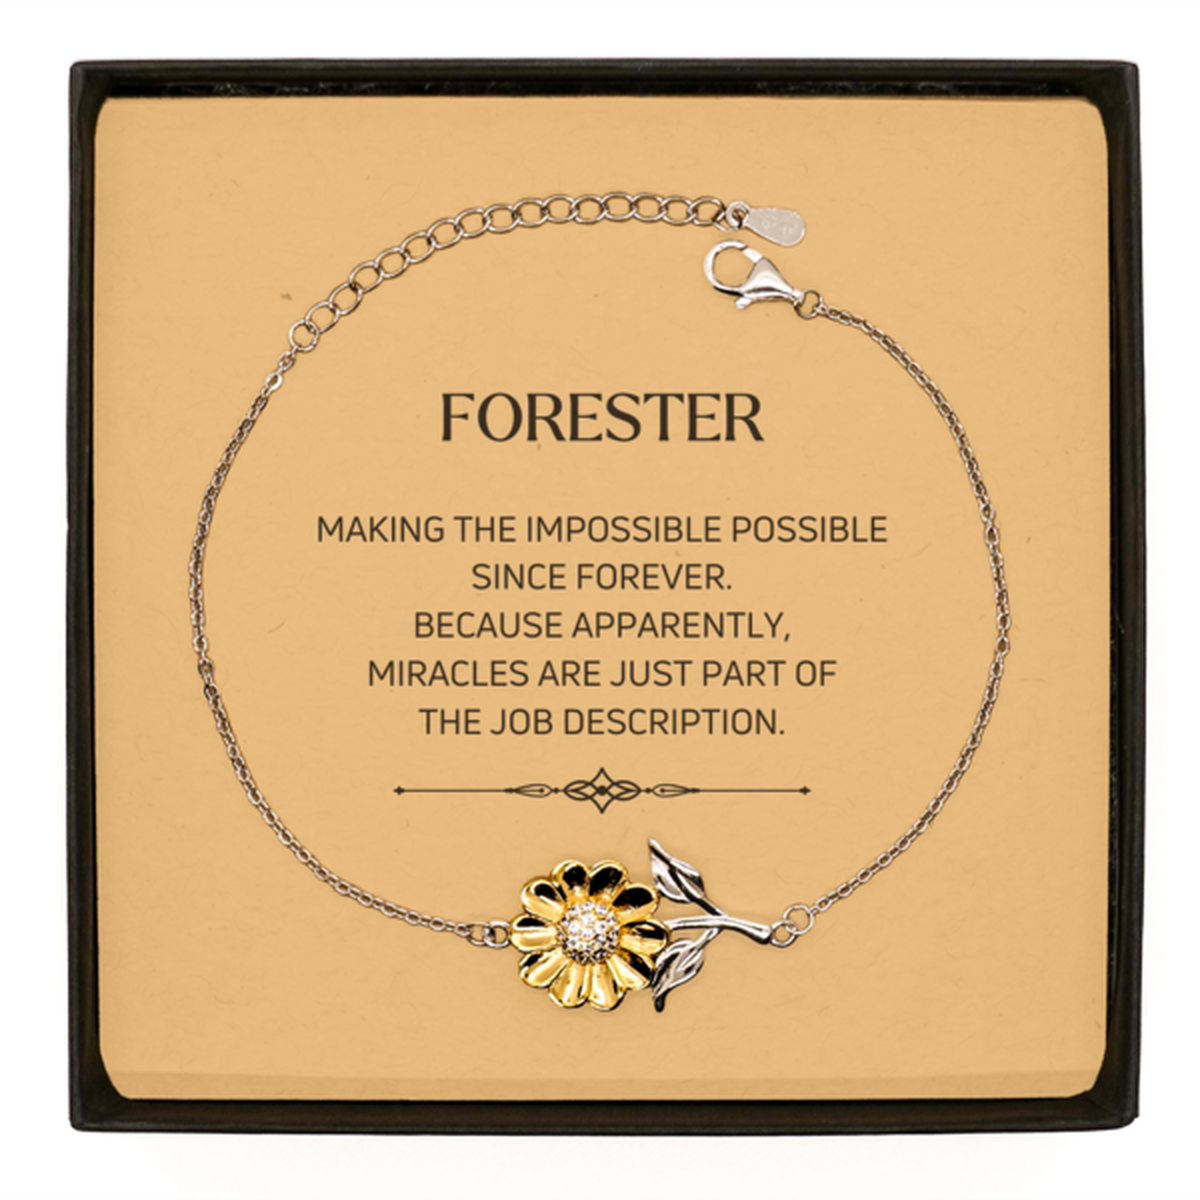 Funny Forester Gifts, Miracles are just part of the job description, Inspirational Birthday Sunflower Bracelet For Forester, Men, Women, Coworkers, Friends, Boss